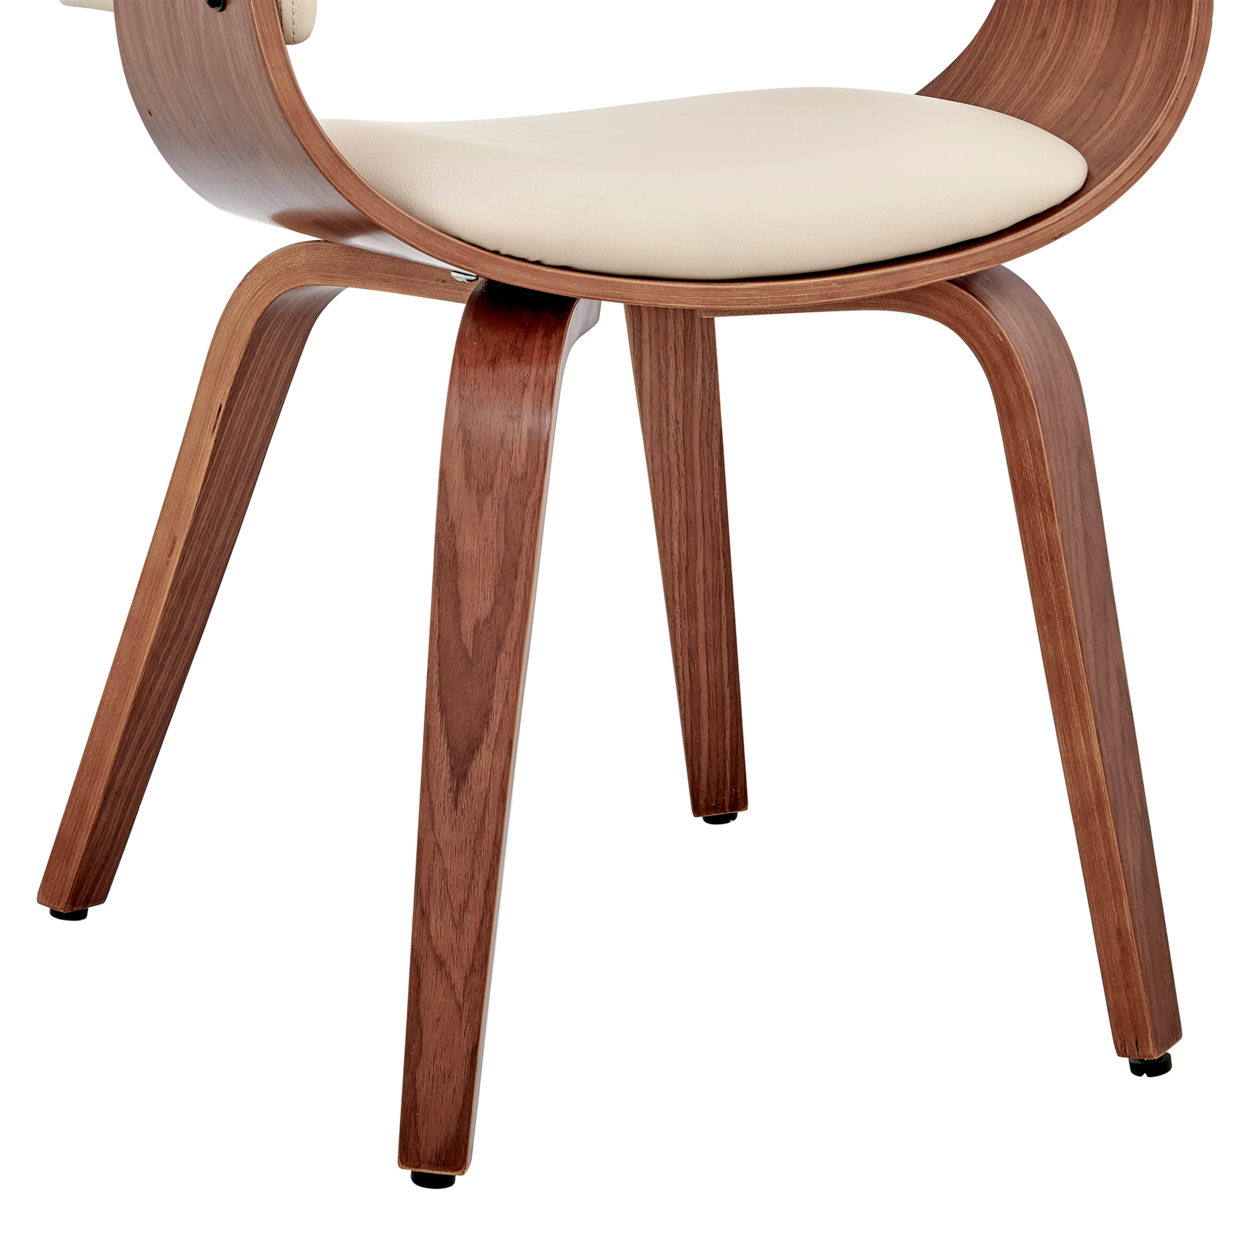 Leatherette Dining Chair With Curved Seat, Cream And Brown- Saltoro Sherpi